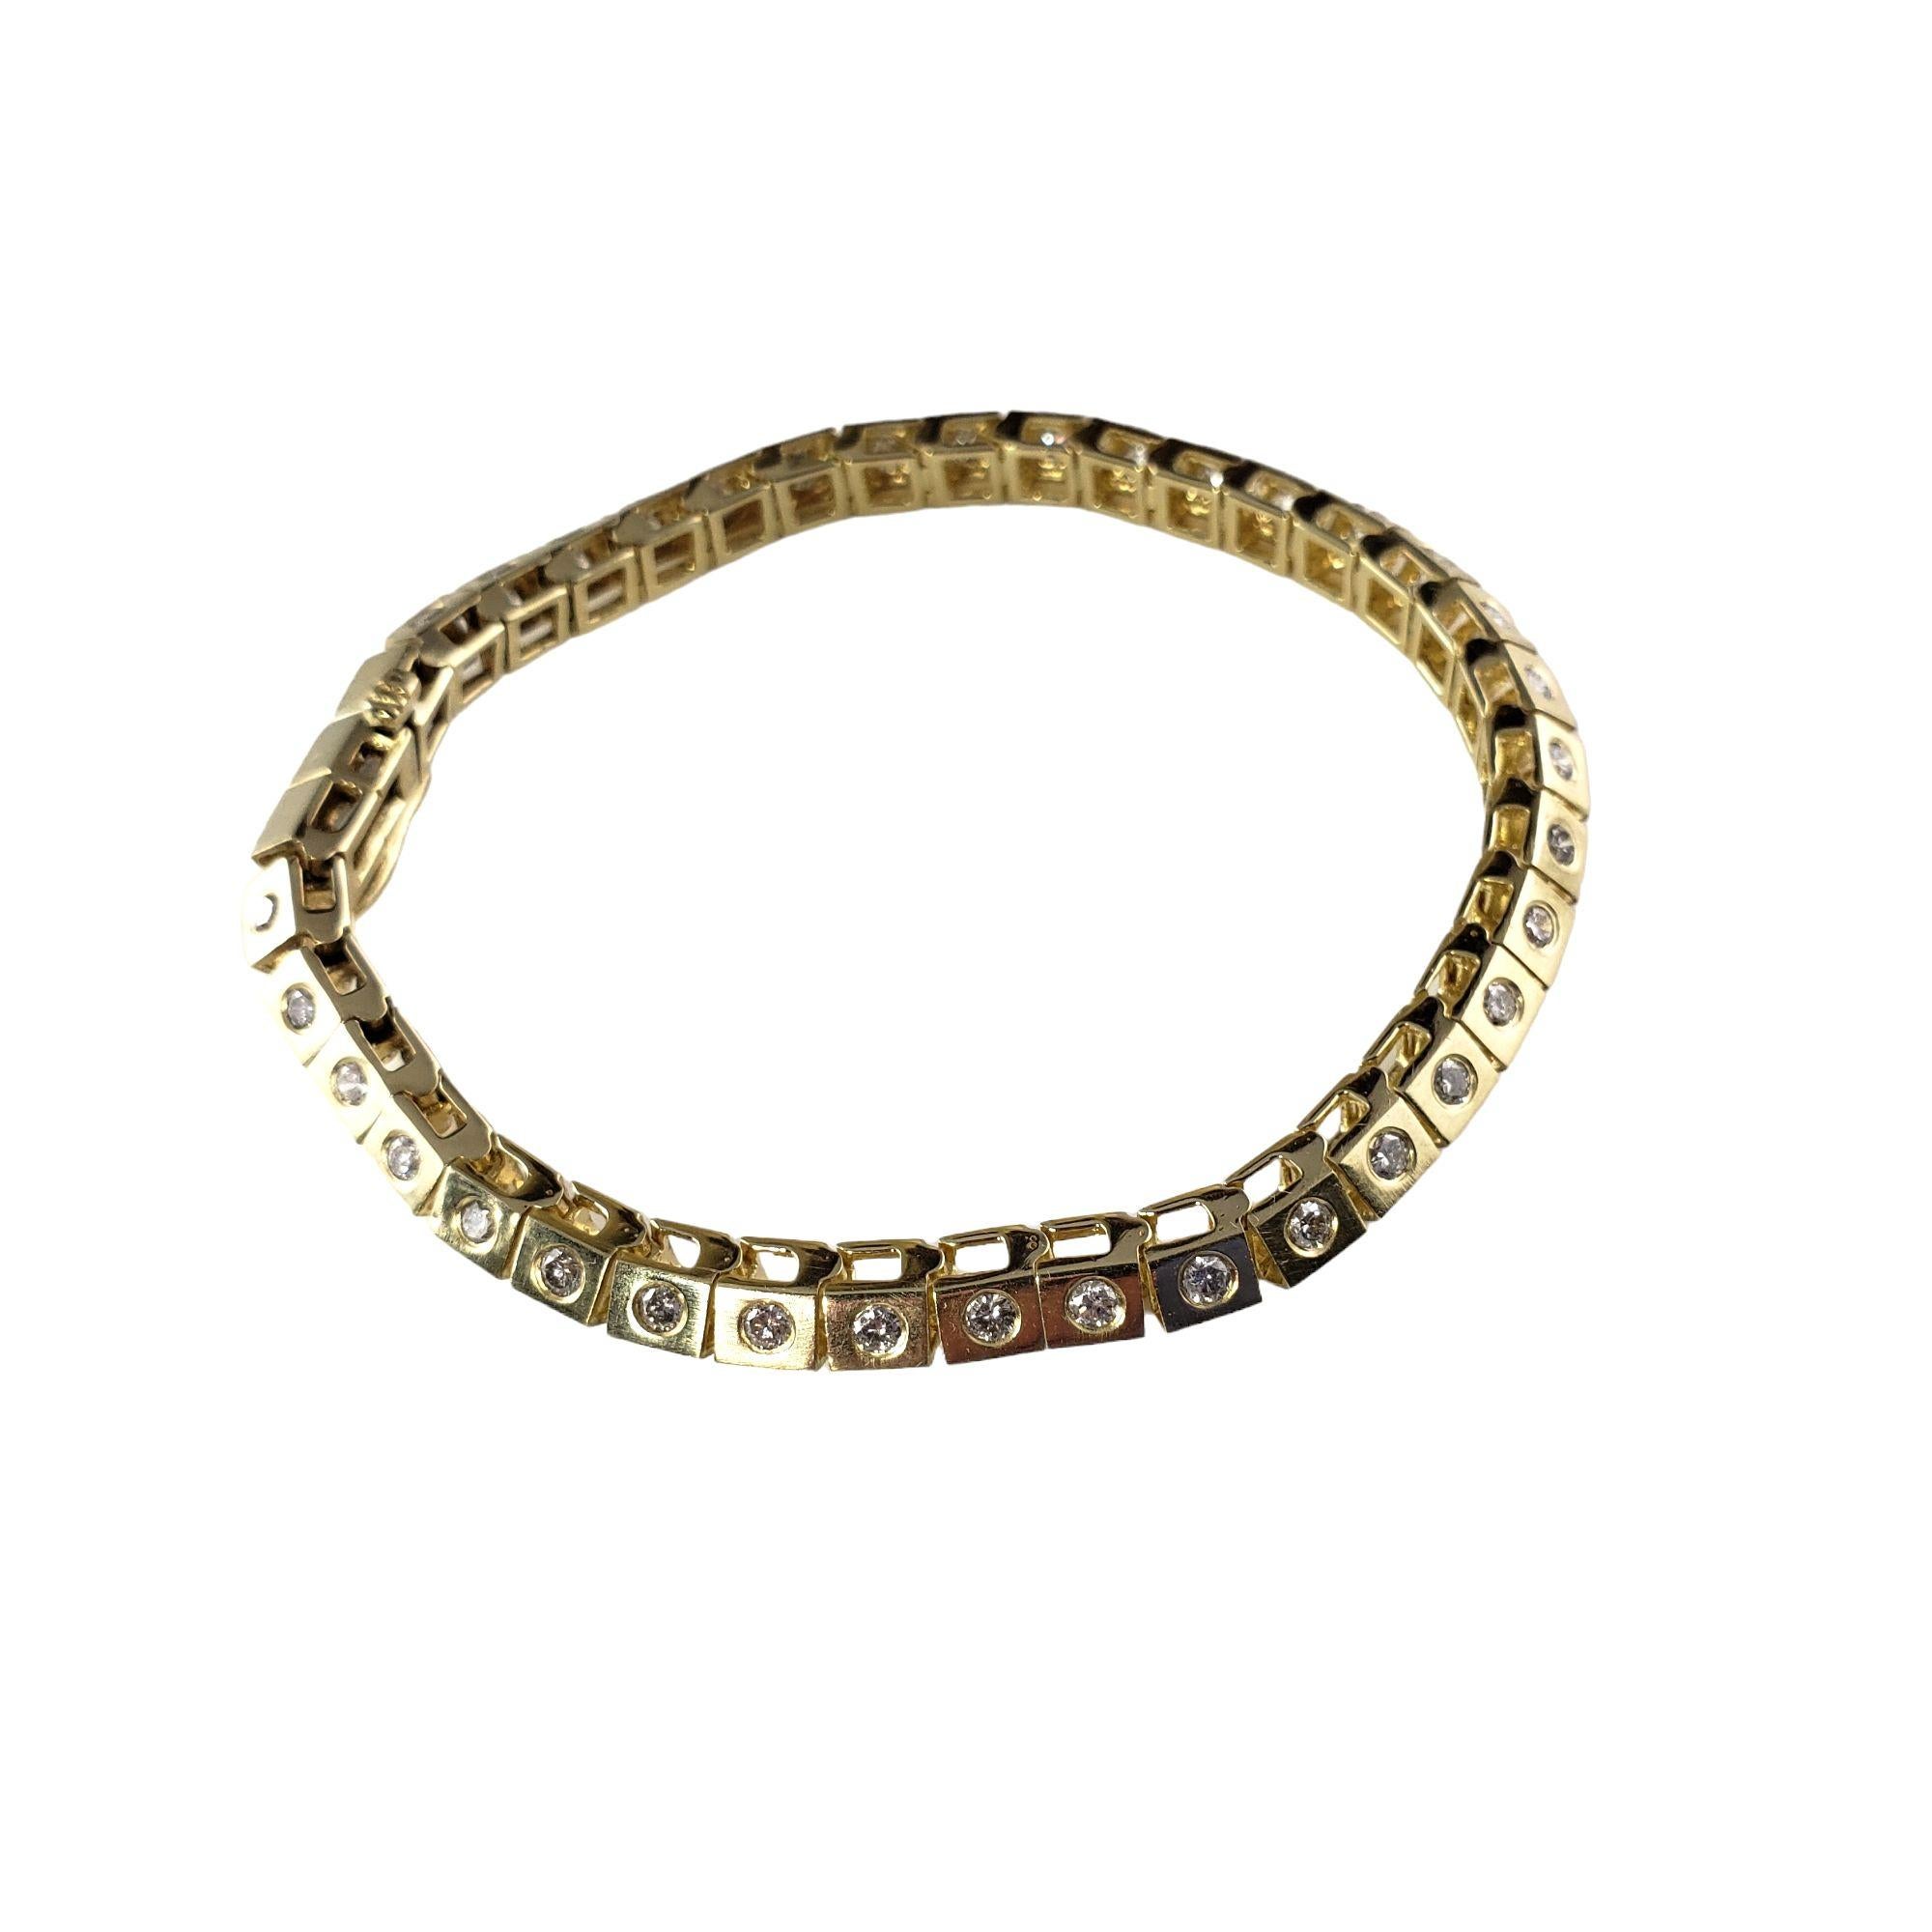 Vintage 14 Karat Yellow Gold and Diamond Bracelet-

This sparkling bracelet features 70 round brilliant cut diamonds set in classic 14K yellow gold. Width: 5 mm.

Approximate total diamond weight: 2.10 ct.

Diamond color: I

Diamond clarity: